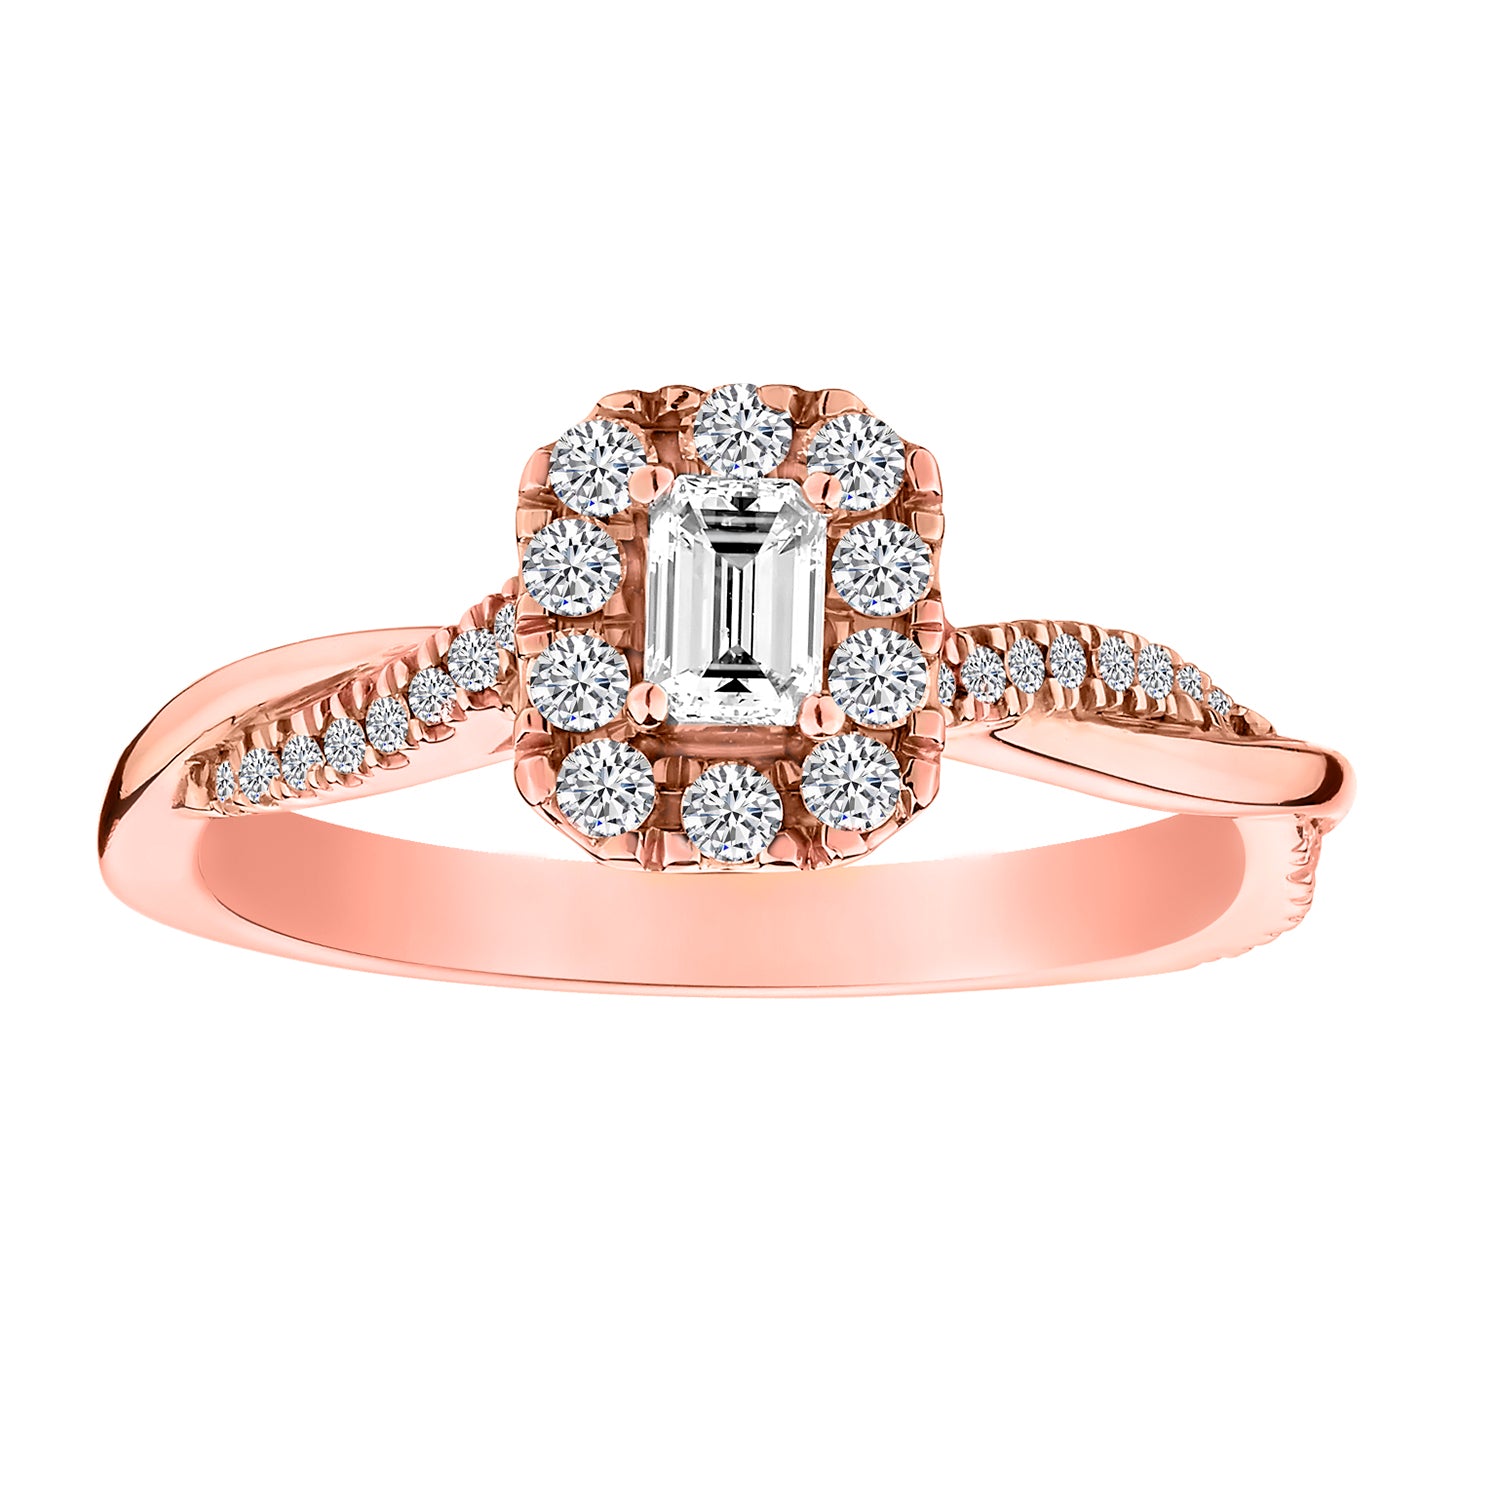 .50 Carat Diamond "Victorian Beauty" Ring,  14kt Rose Gold. Griffin Jewellery Designs